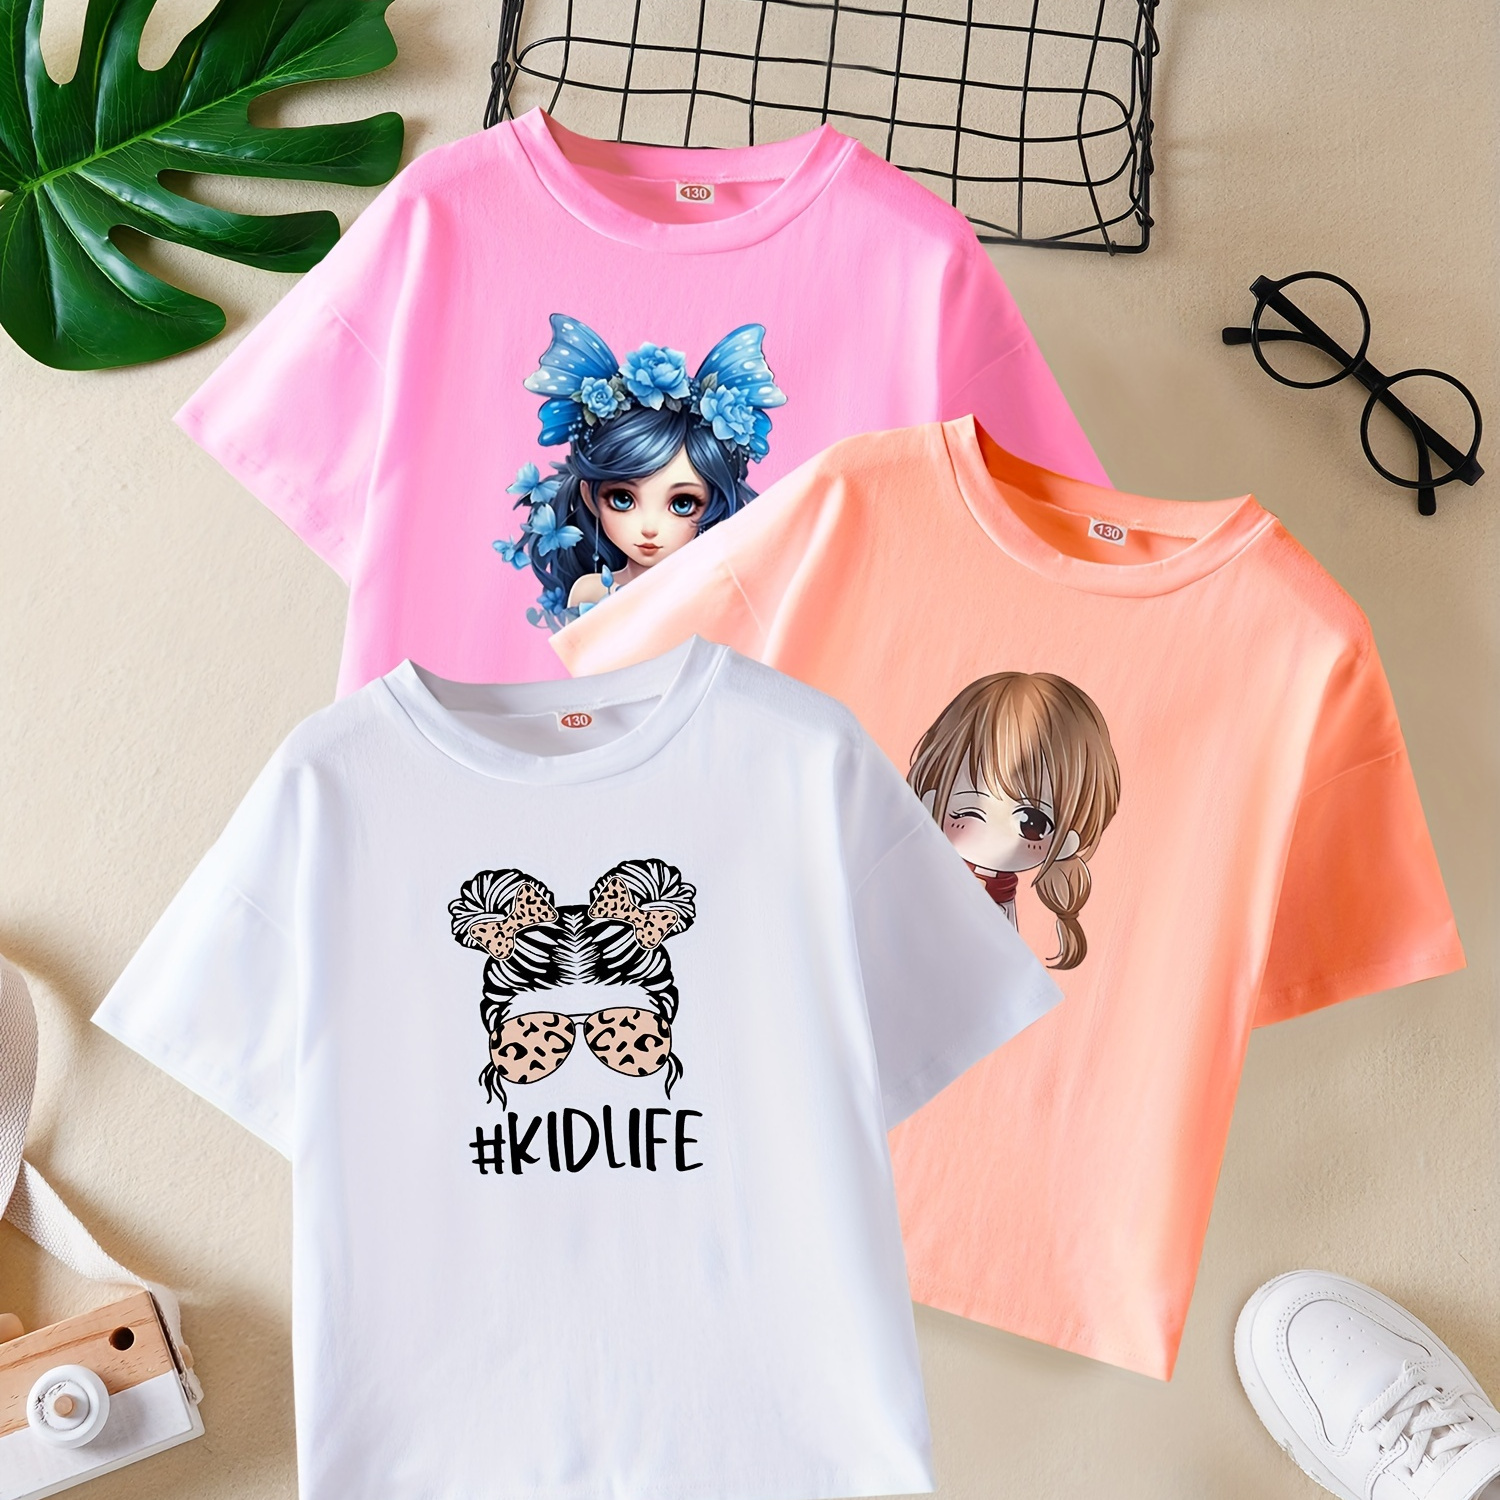 

#kidlife And Anime Girl With Sunglasses/cute Cartoon Girl/beautiful Anime Girl Graphic Print, 3pcs, Girls' Trendy Crew Neck T-shirt Set With Short Sleeves, Summer Clothing For Outdoor Activities